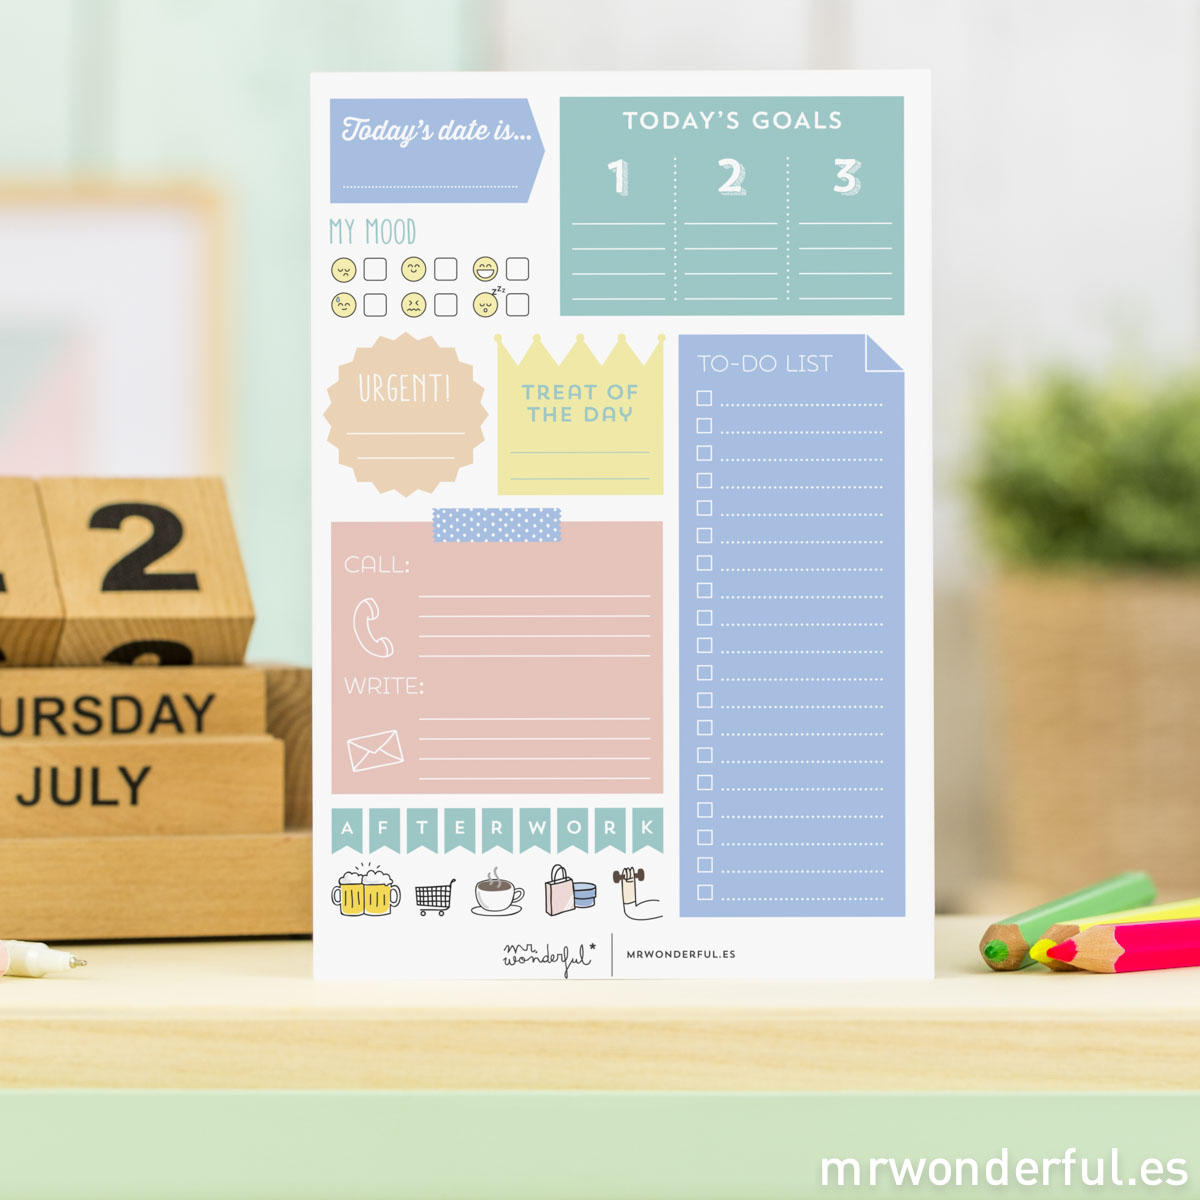 mrwonderful_WEEK15_Activit-planner-your-day-to-day-life_01